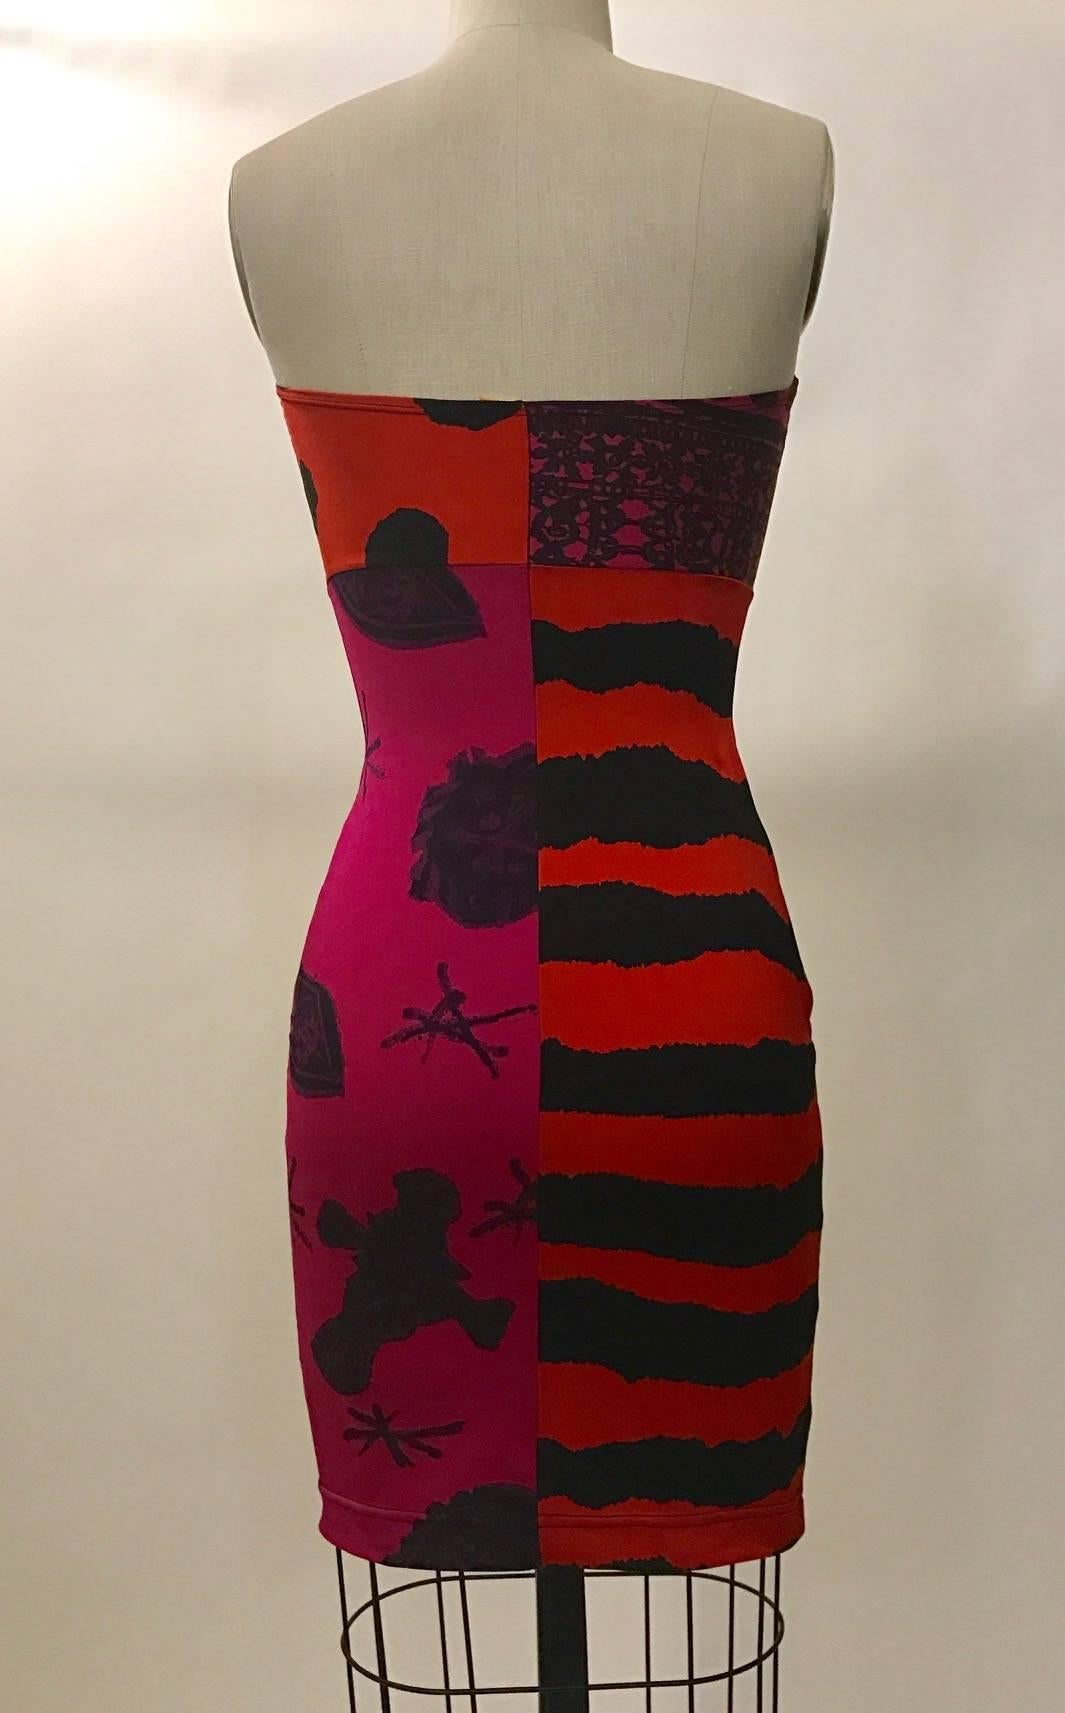 Christian Lacroix Pret-a-Porter 1990s super stretchy bodycon strapless dress in quartered red and pink fabric with black graffiti-like polka dots, stripes, and tribal print. Pull on, unlined.

80% polyamide, 20% lycra. (Great for a pool or swim